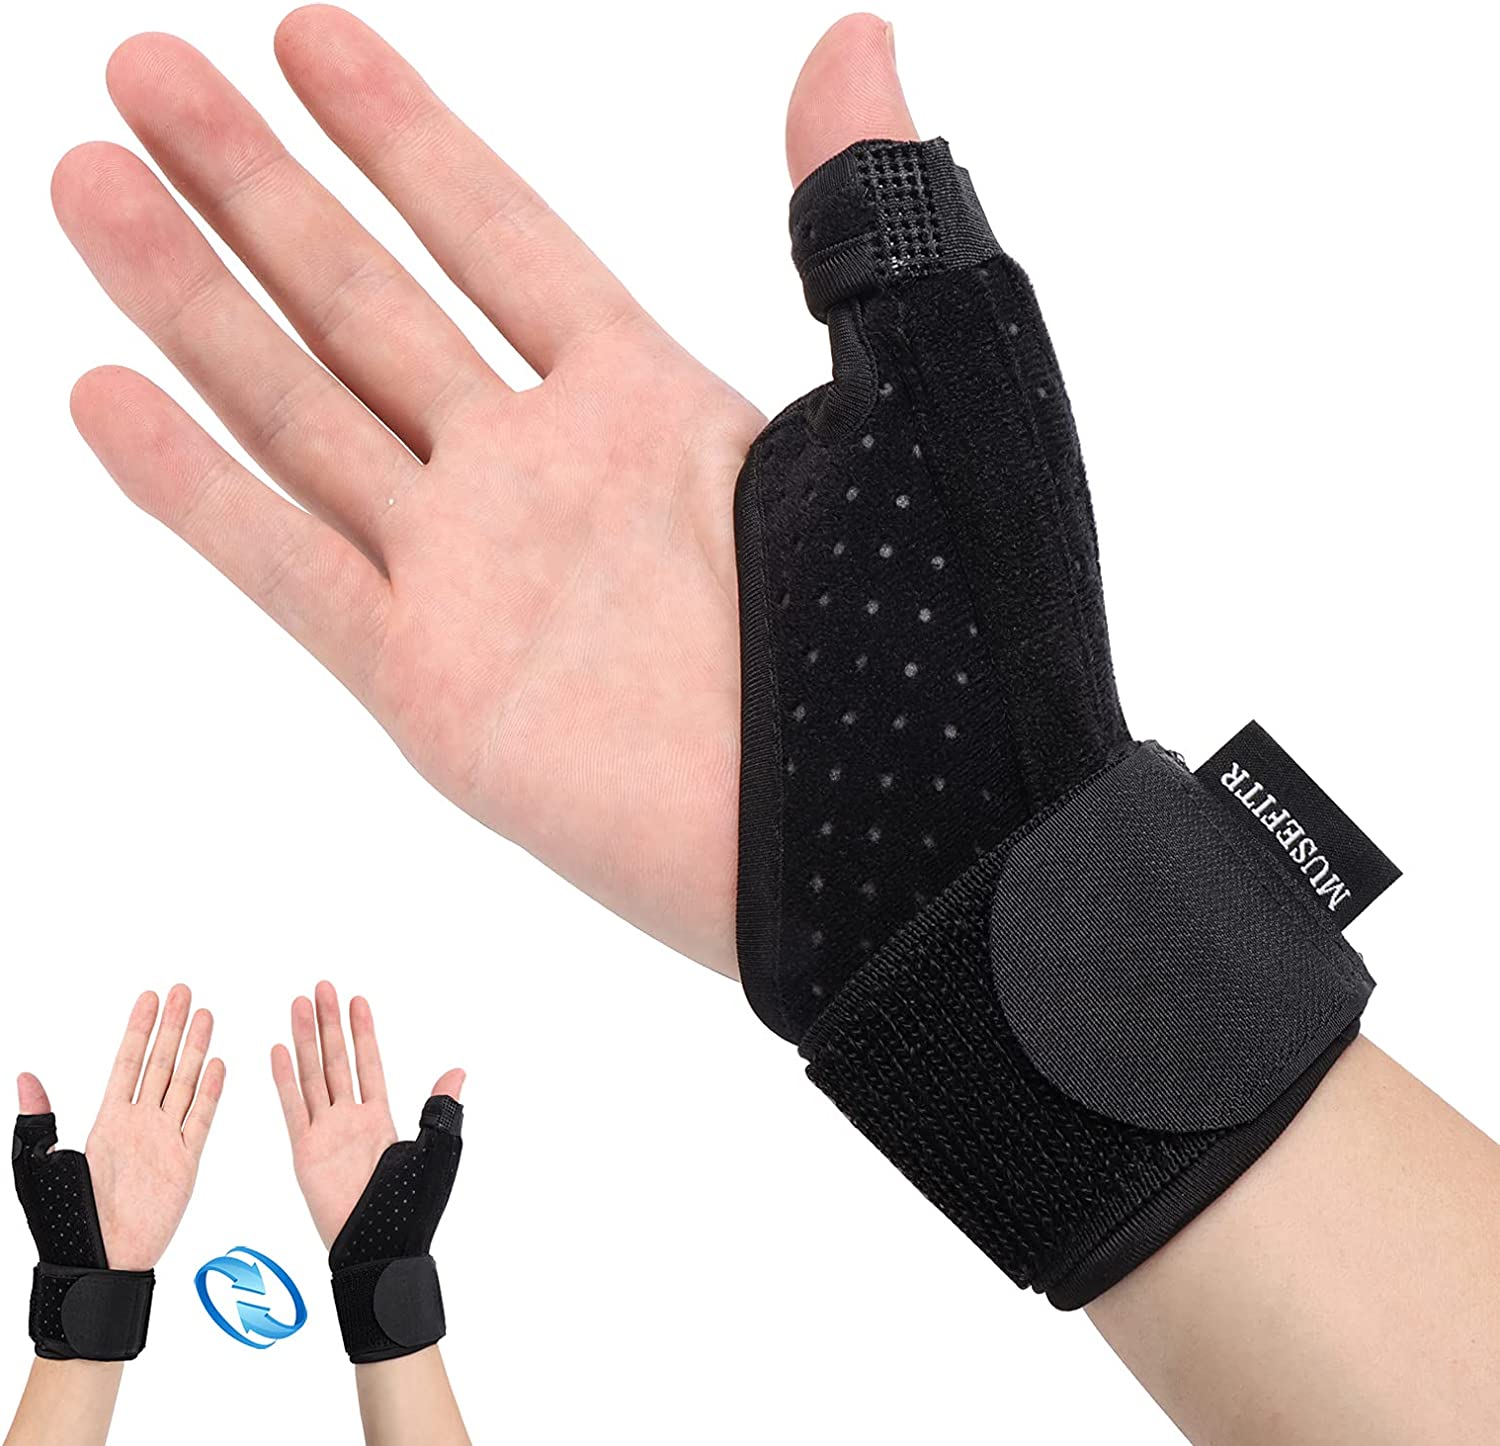 Thumb Splint Brace for Right and Left Hand-Reversible Wrist and Thumb Brace Support for Trigger Thumb, Arthritis, Tendonitis,Thumb Tenosynovitis, Sprained Thumb-Universal Size for Women and Men